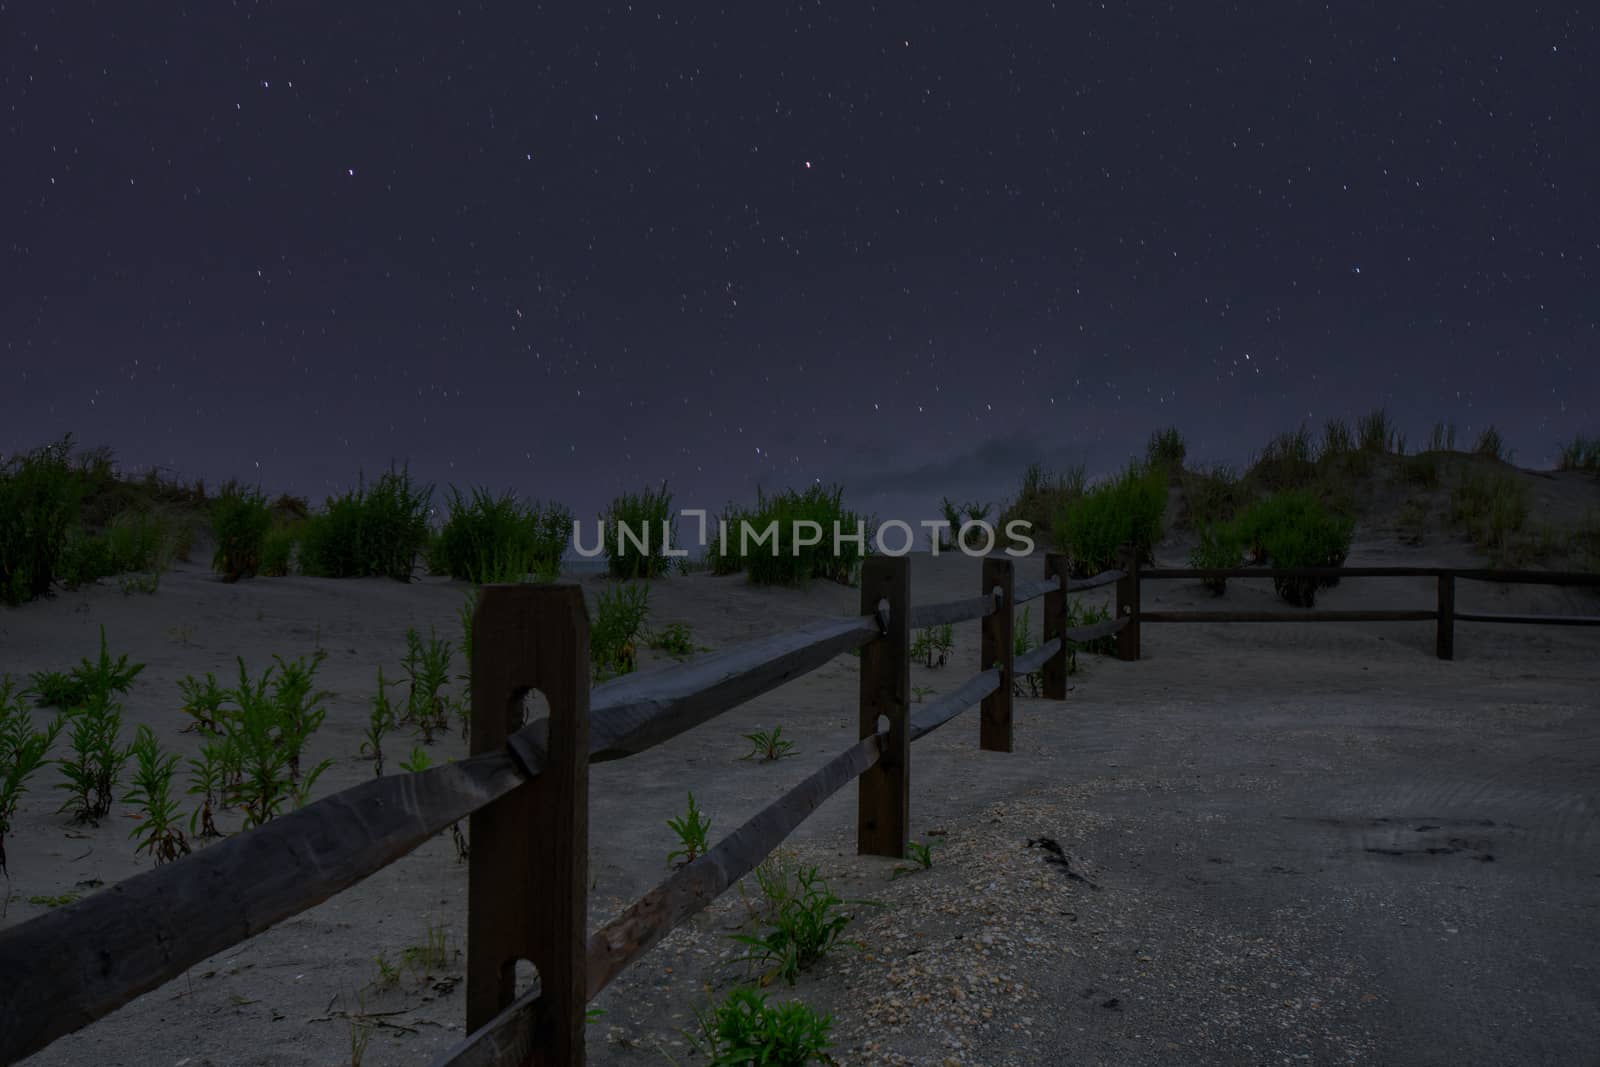 A Beach Path With a Fence on the Side and a Night Sky Full of St by bju12290